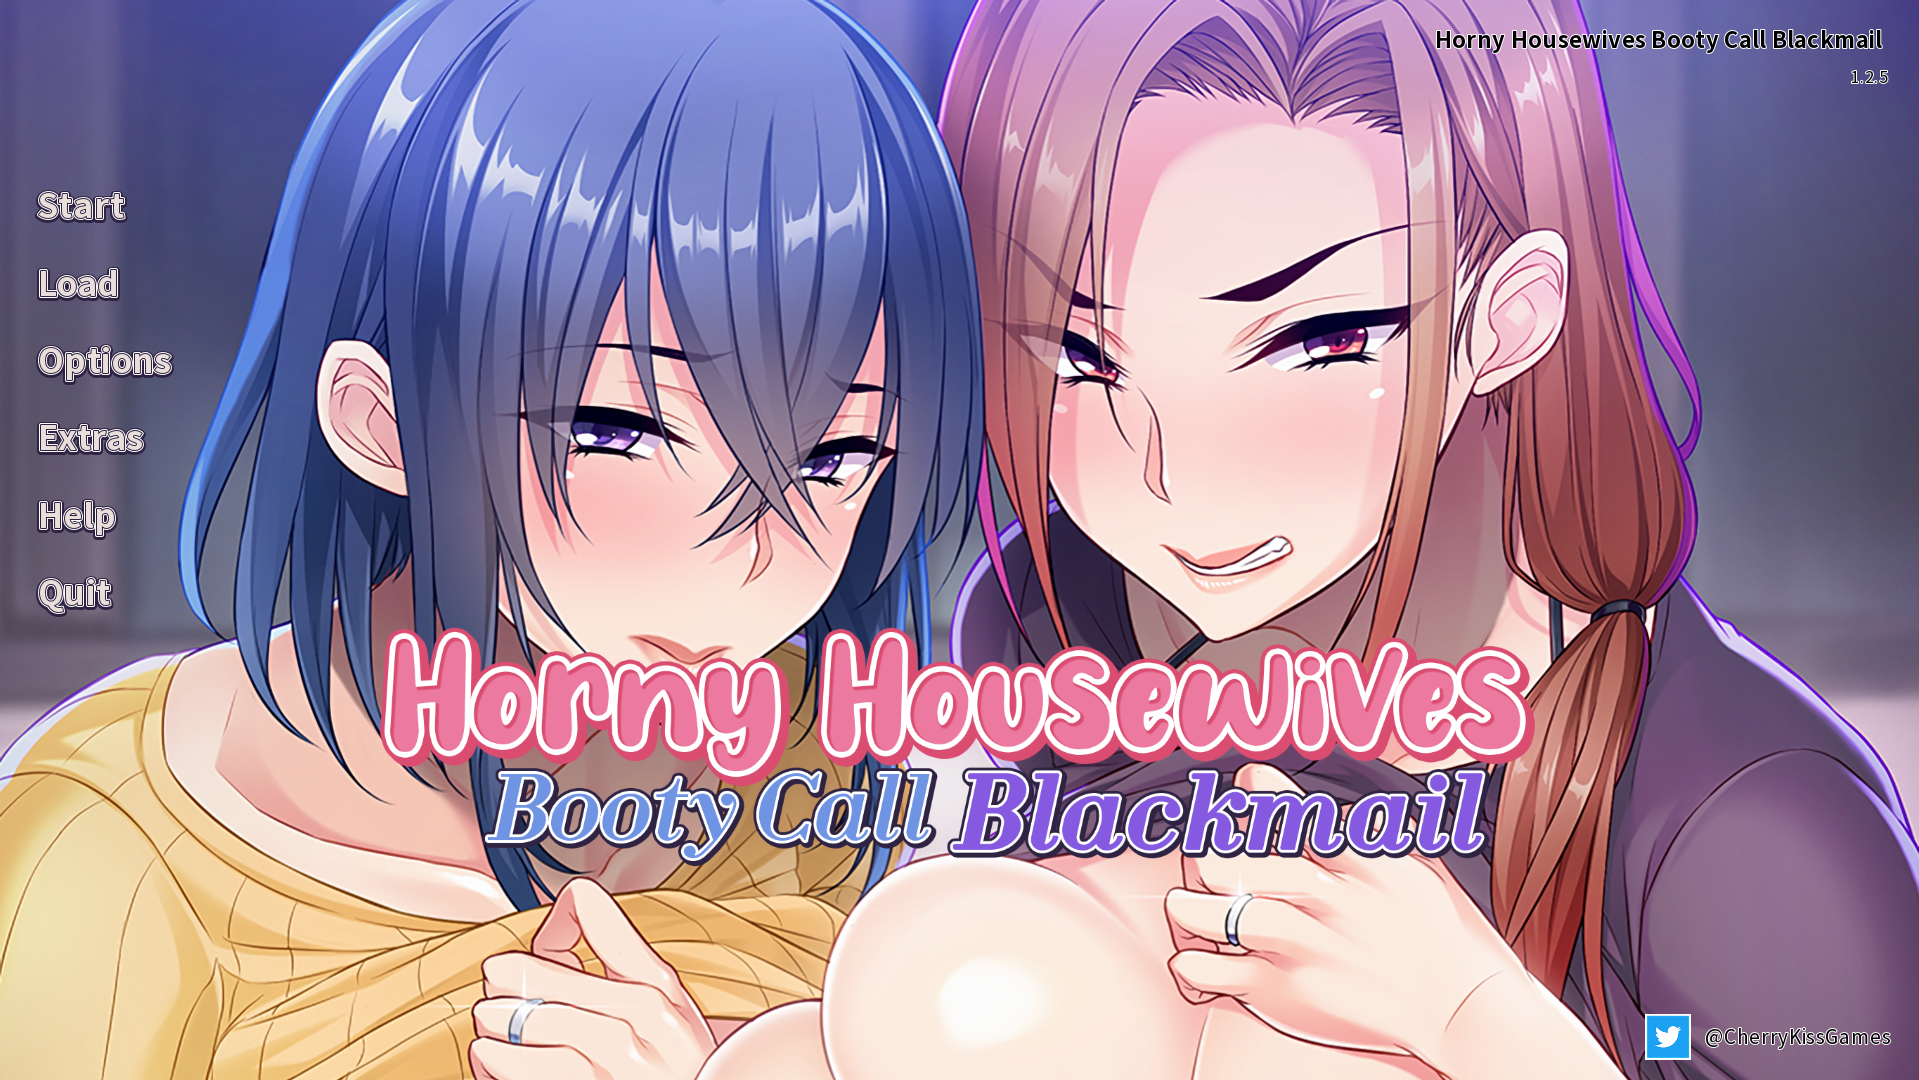 Horny Housewives Booty Call Blackmail COMPLETED - free game download, reviews, mega photo